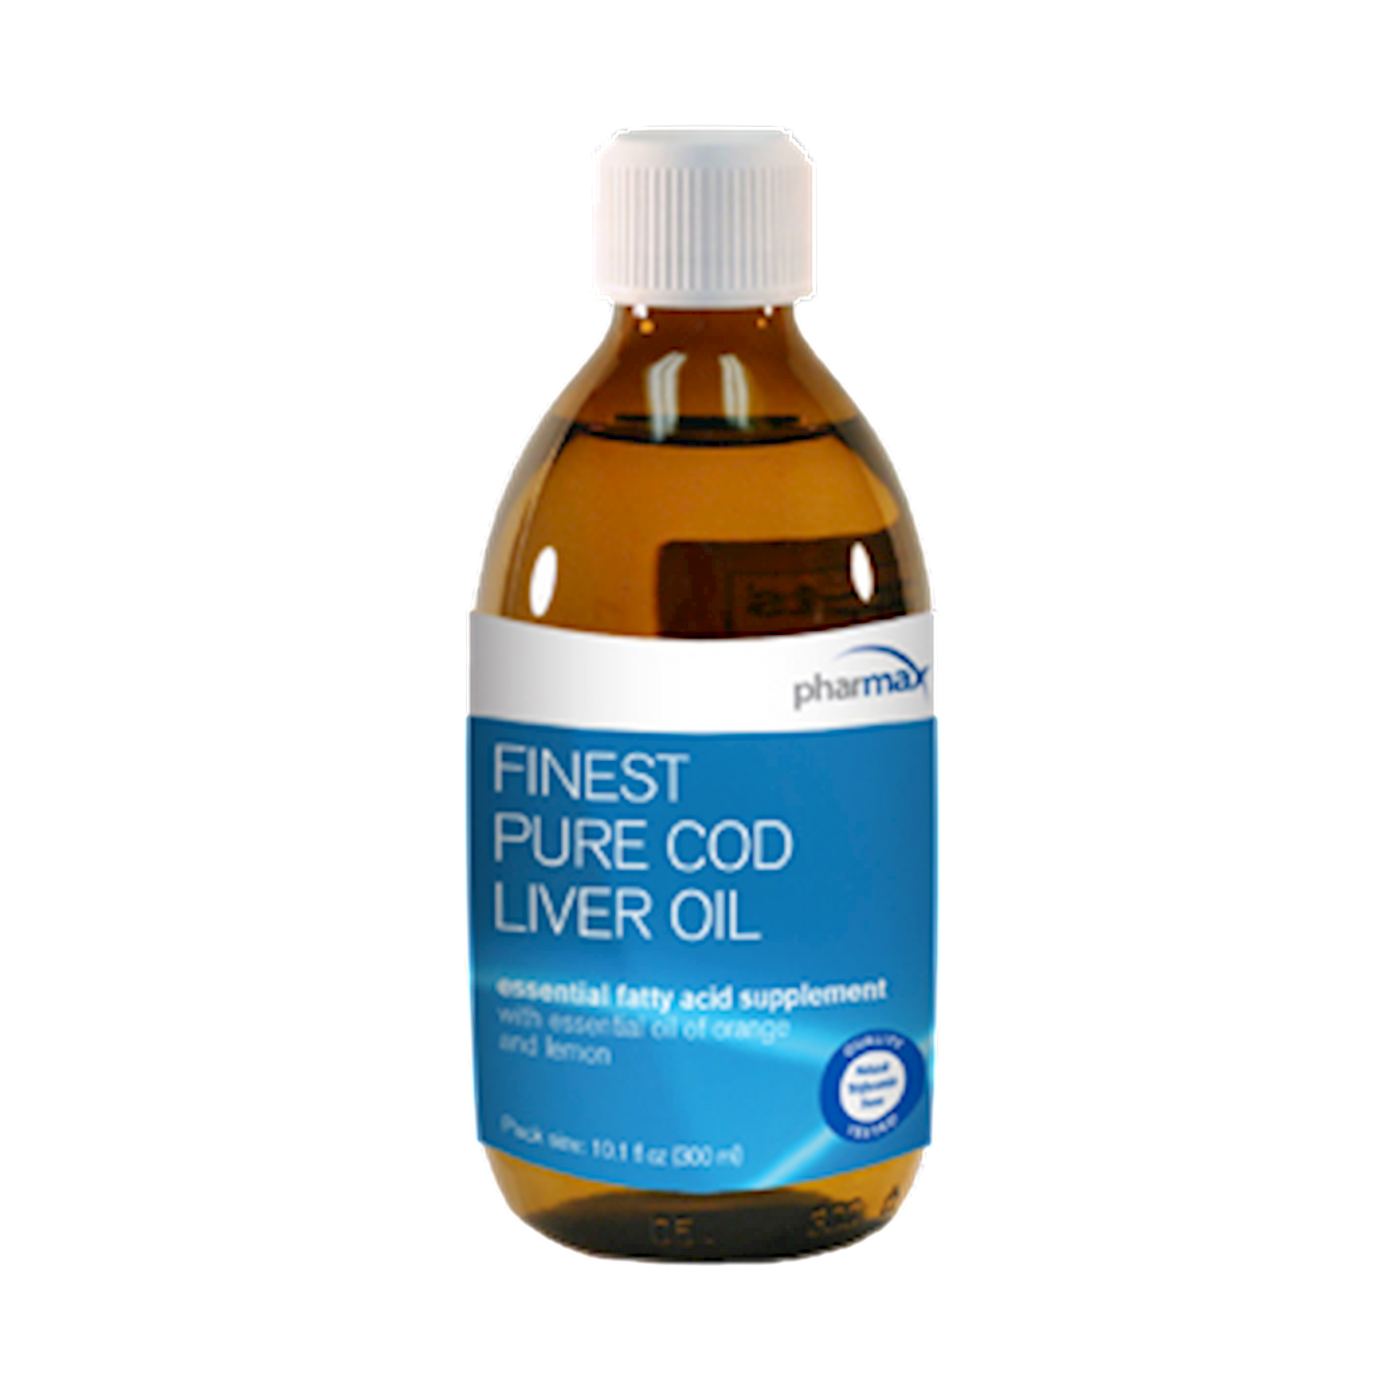 Finest Pure Cod Liver Oil 10.1 fl oz Curated Wellness